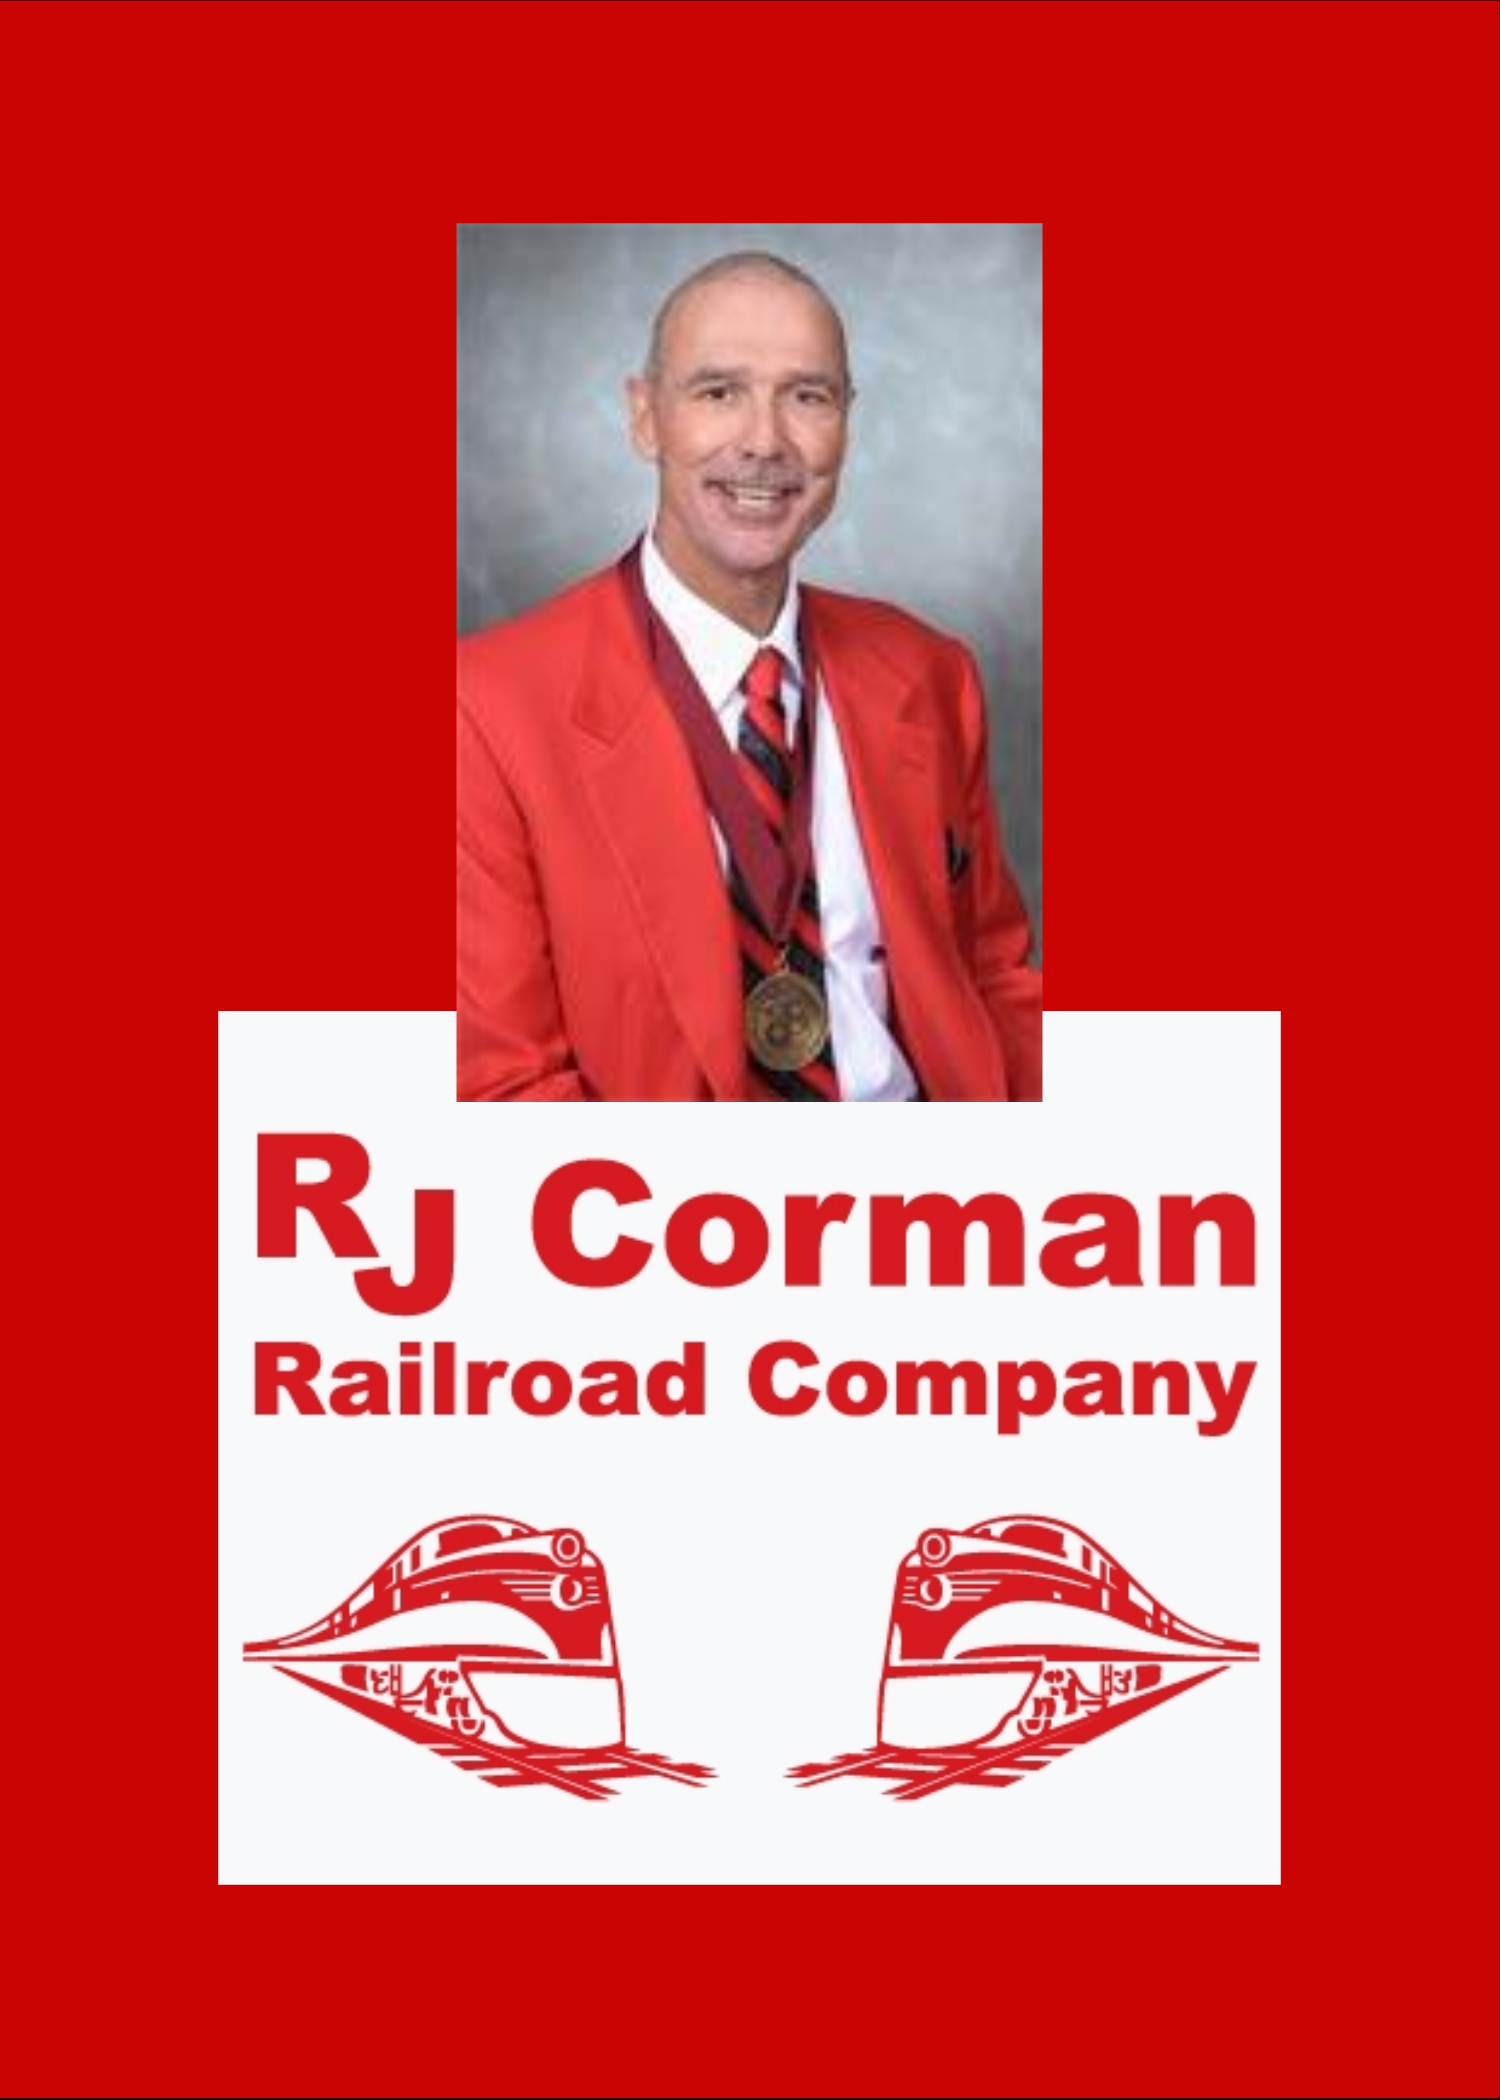 R.J. Corman (with son, Jay) - 5/20/17 - # 127